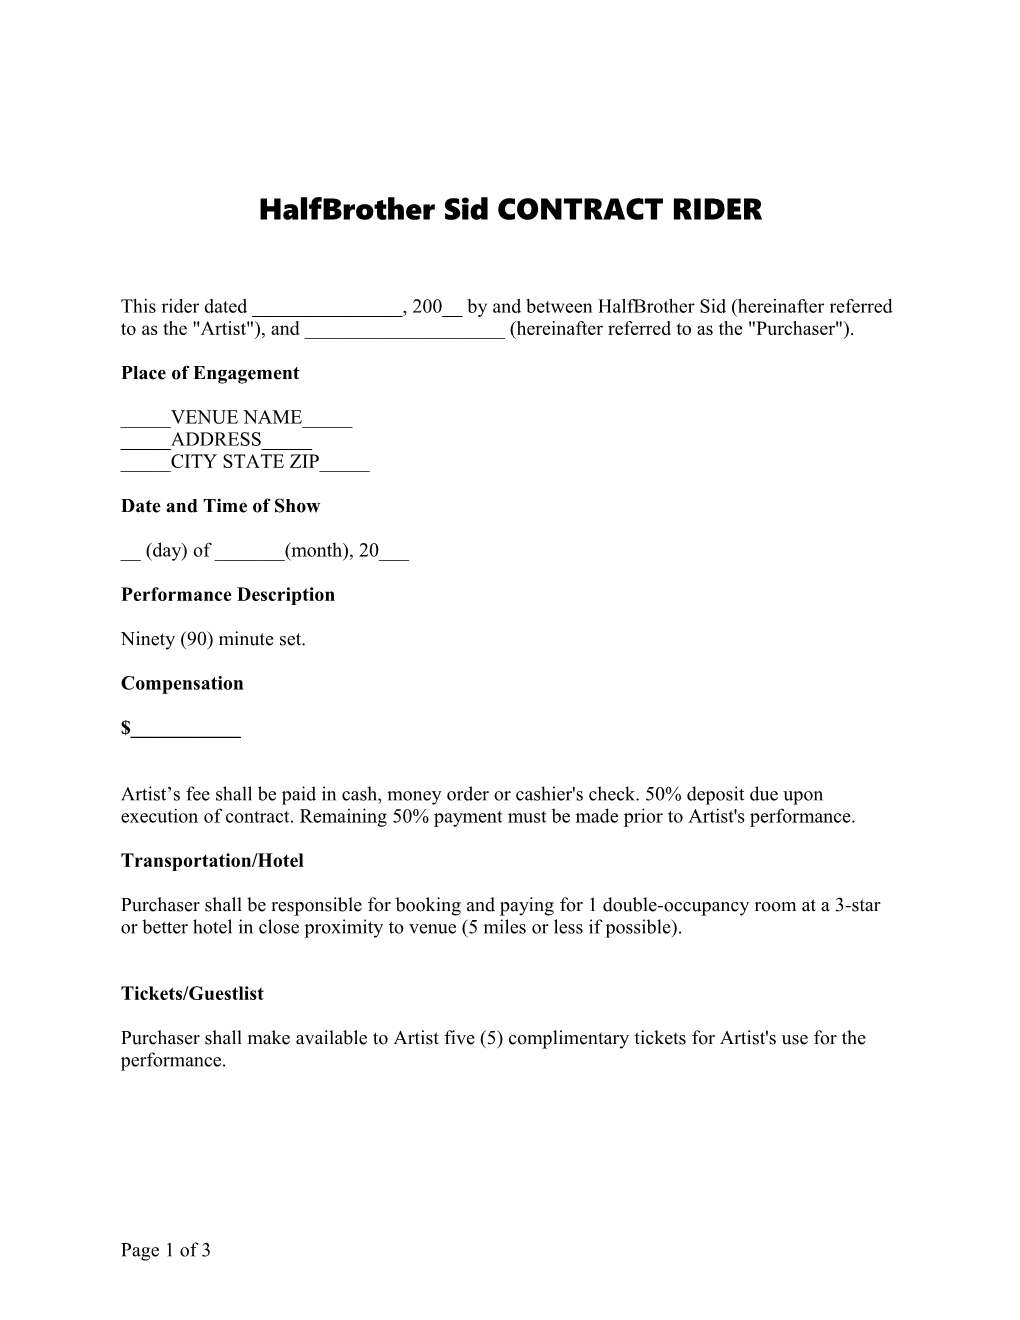 Band Performance Contract Rider